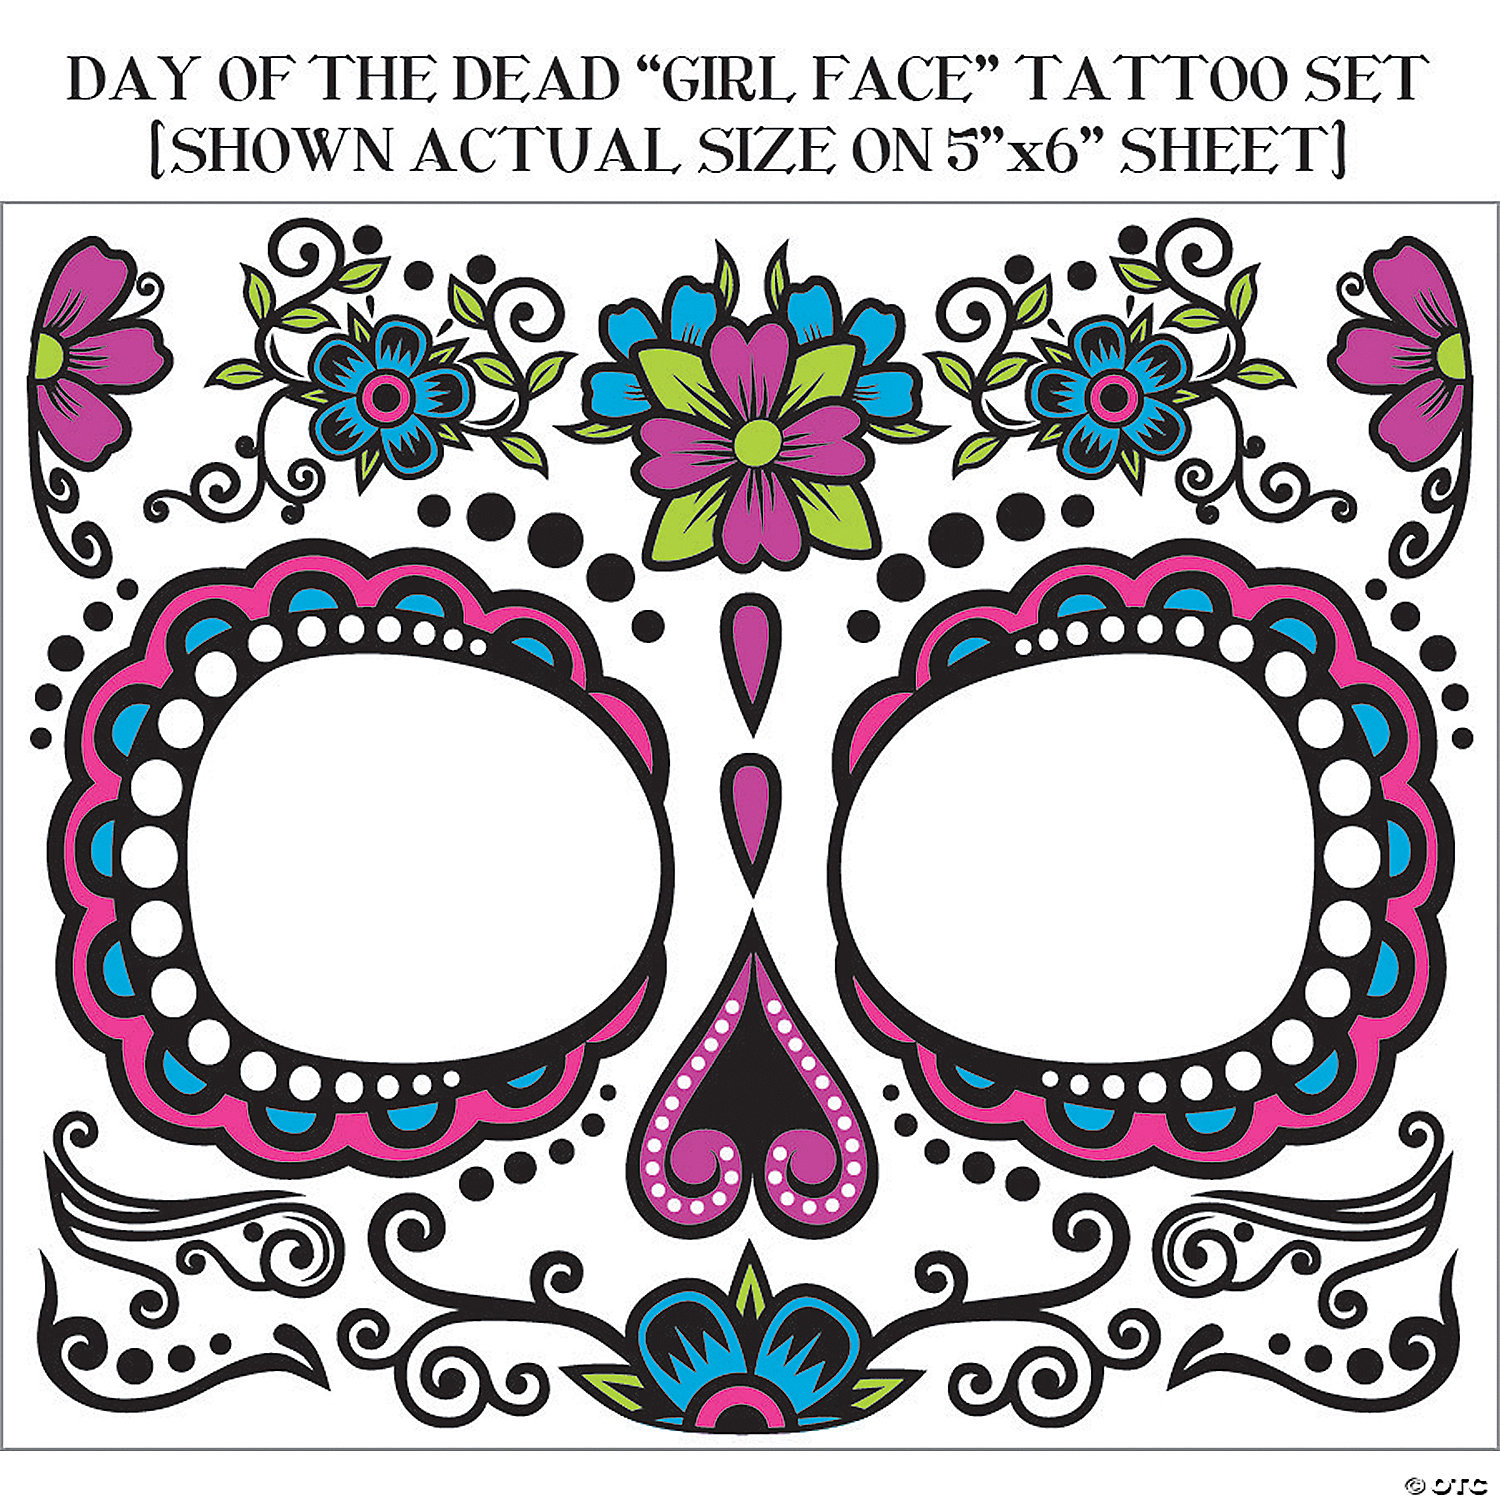 DAY OF THE DEAD FACE TATTOO - HALLOWEEN